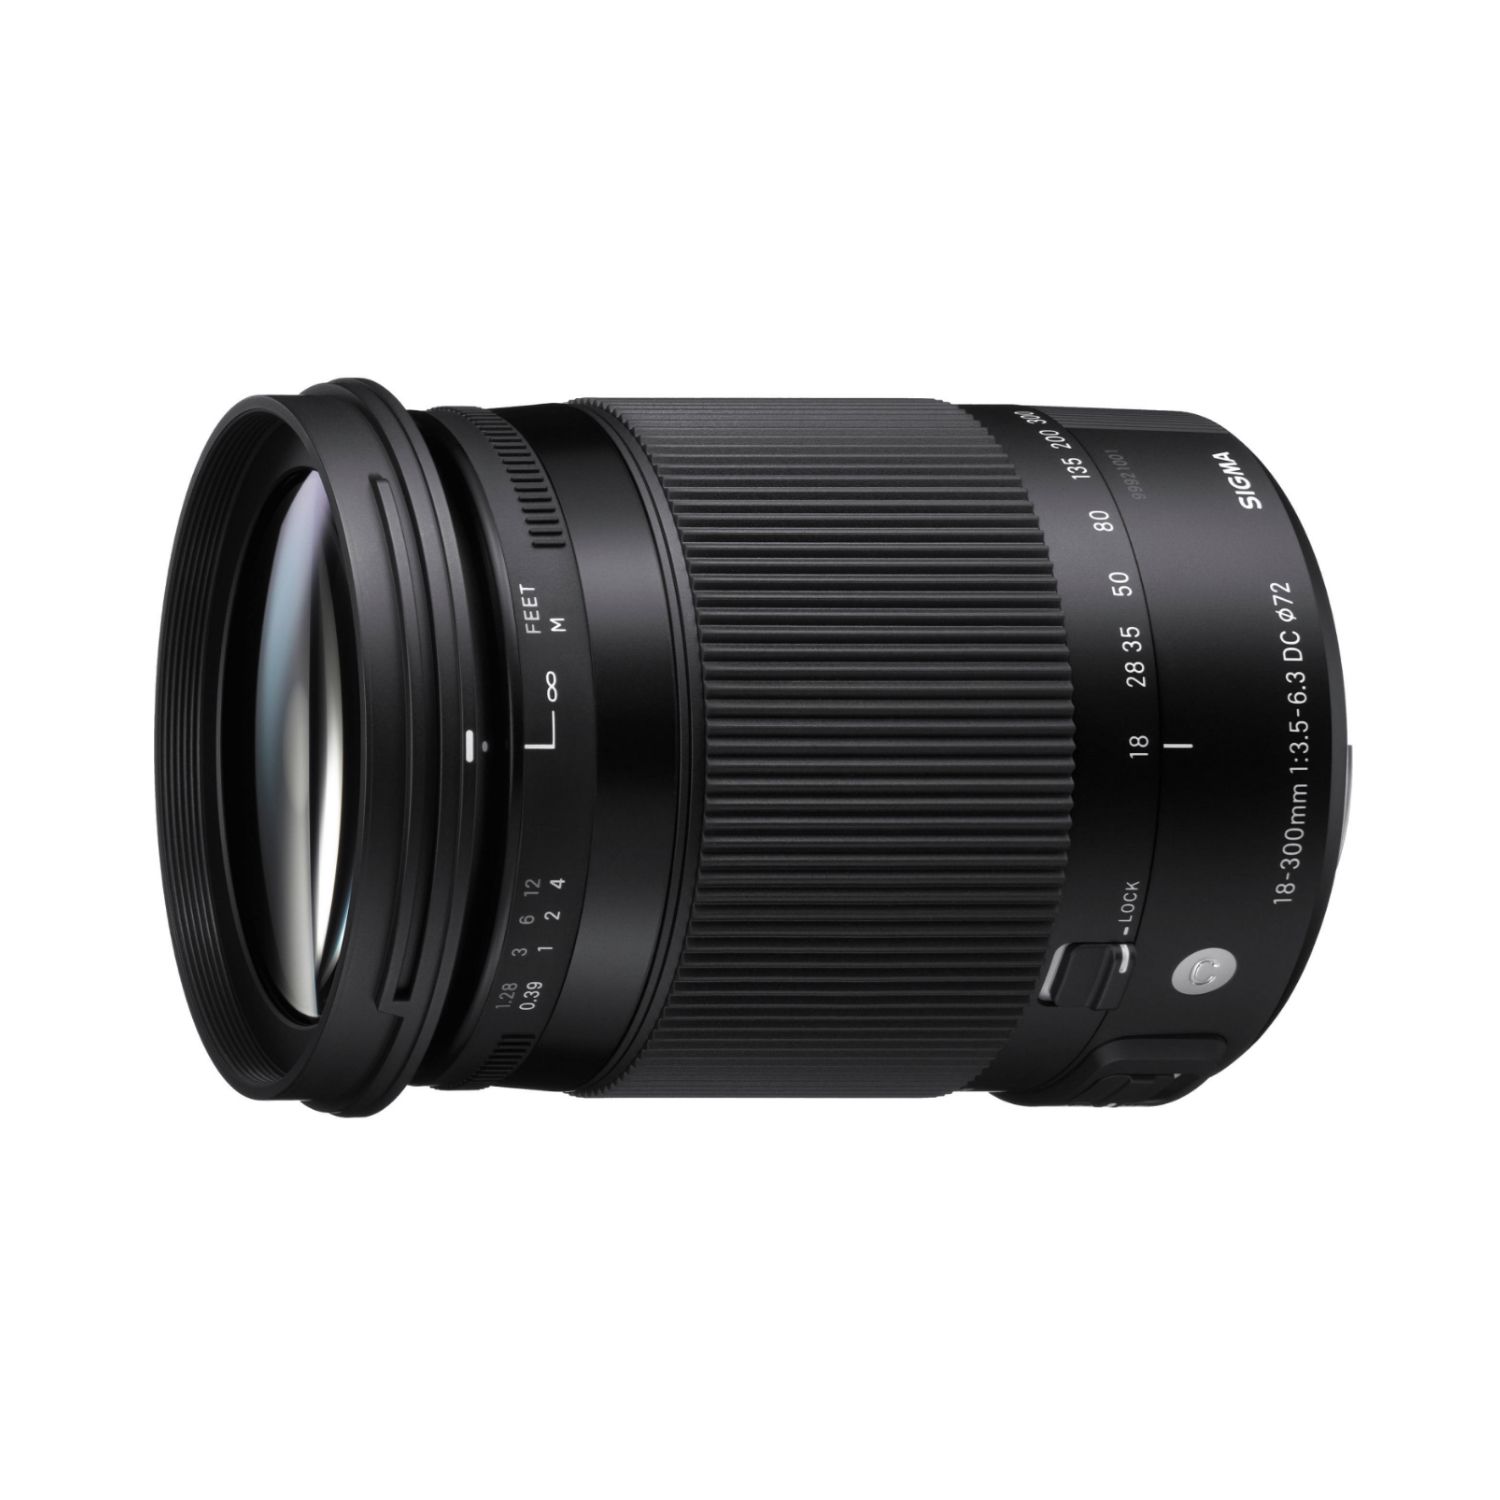 Sigma 18-300mm f/3.5-6.3 DC Macro OS HSM Contemporary Lens for Canon